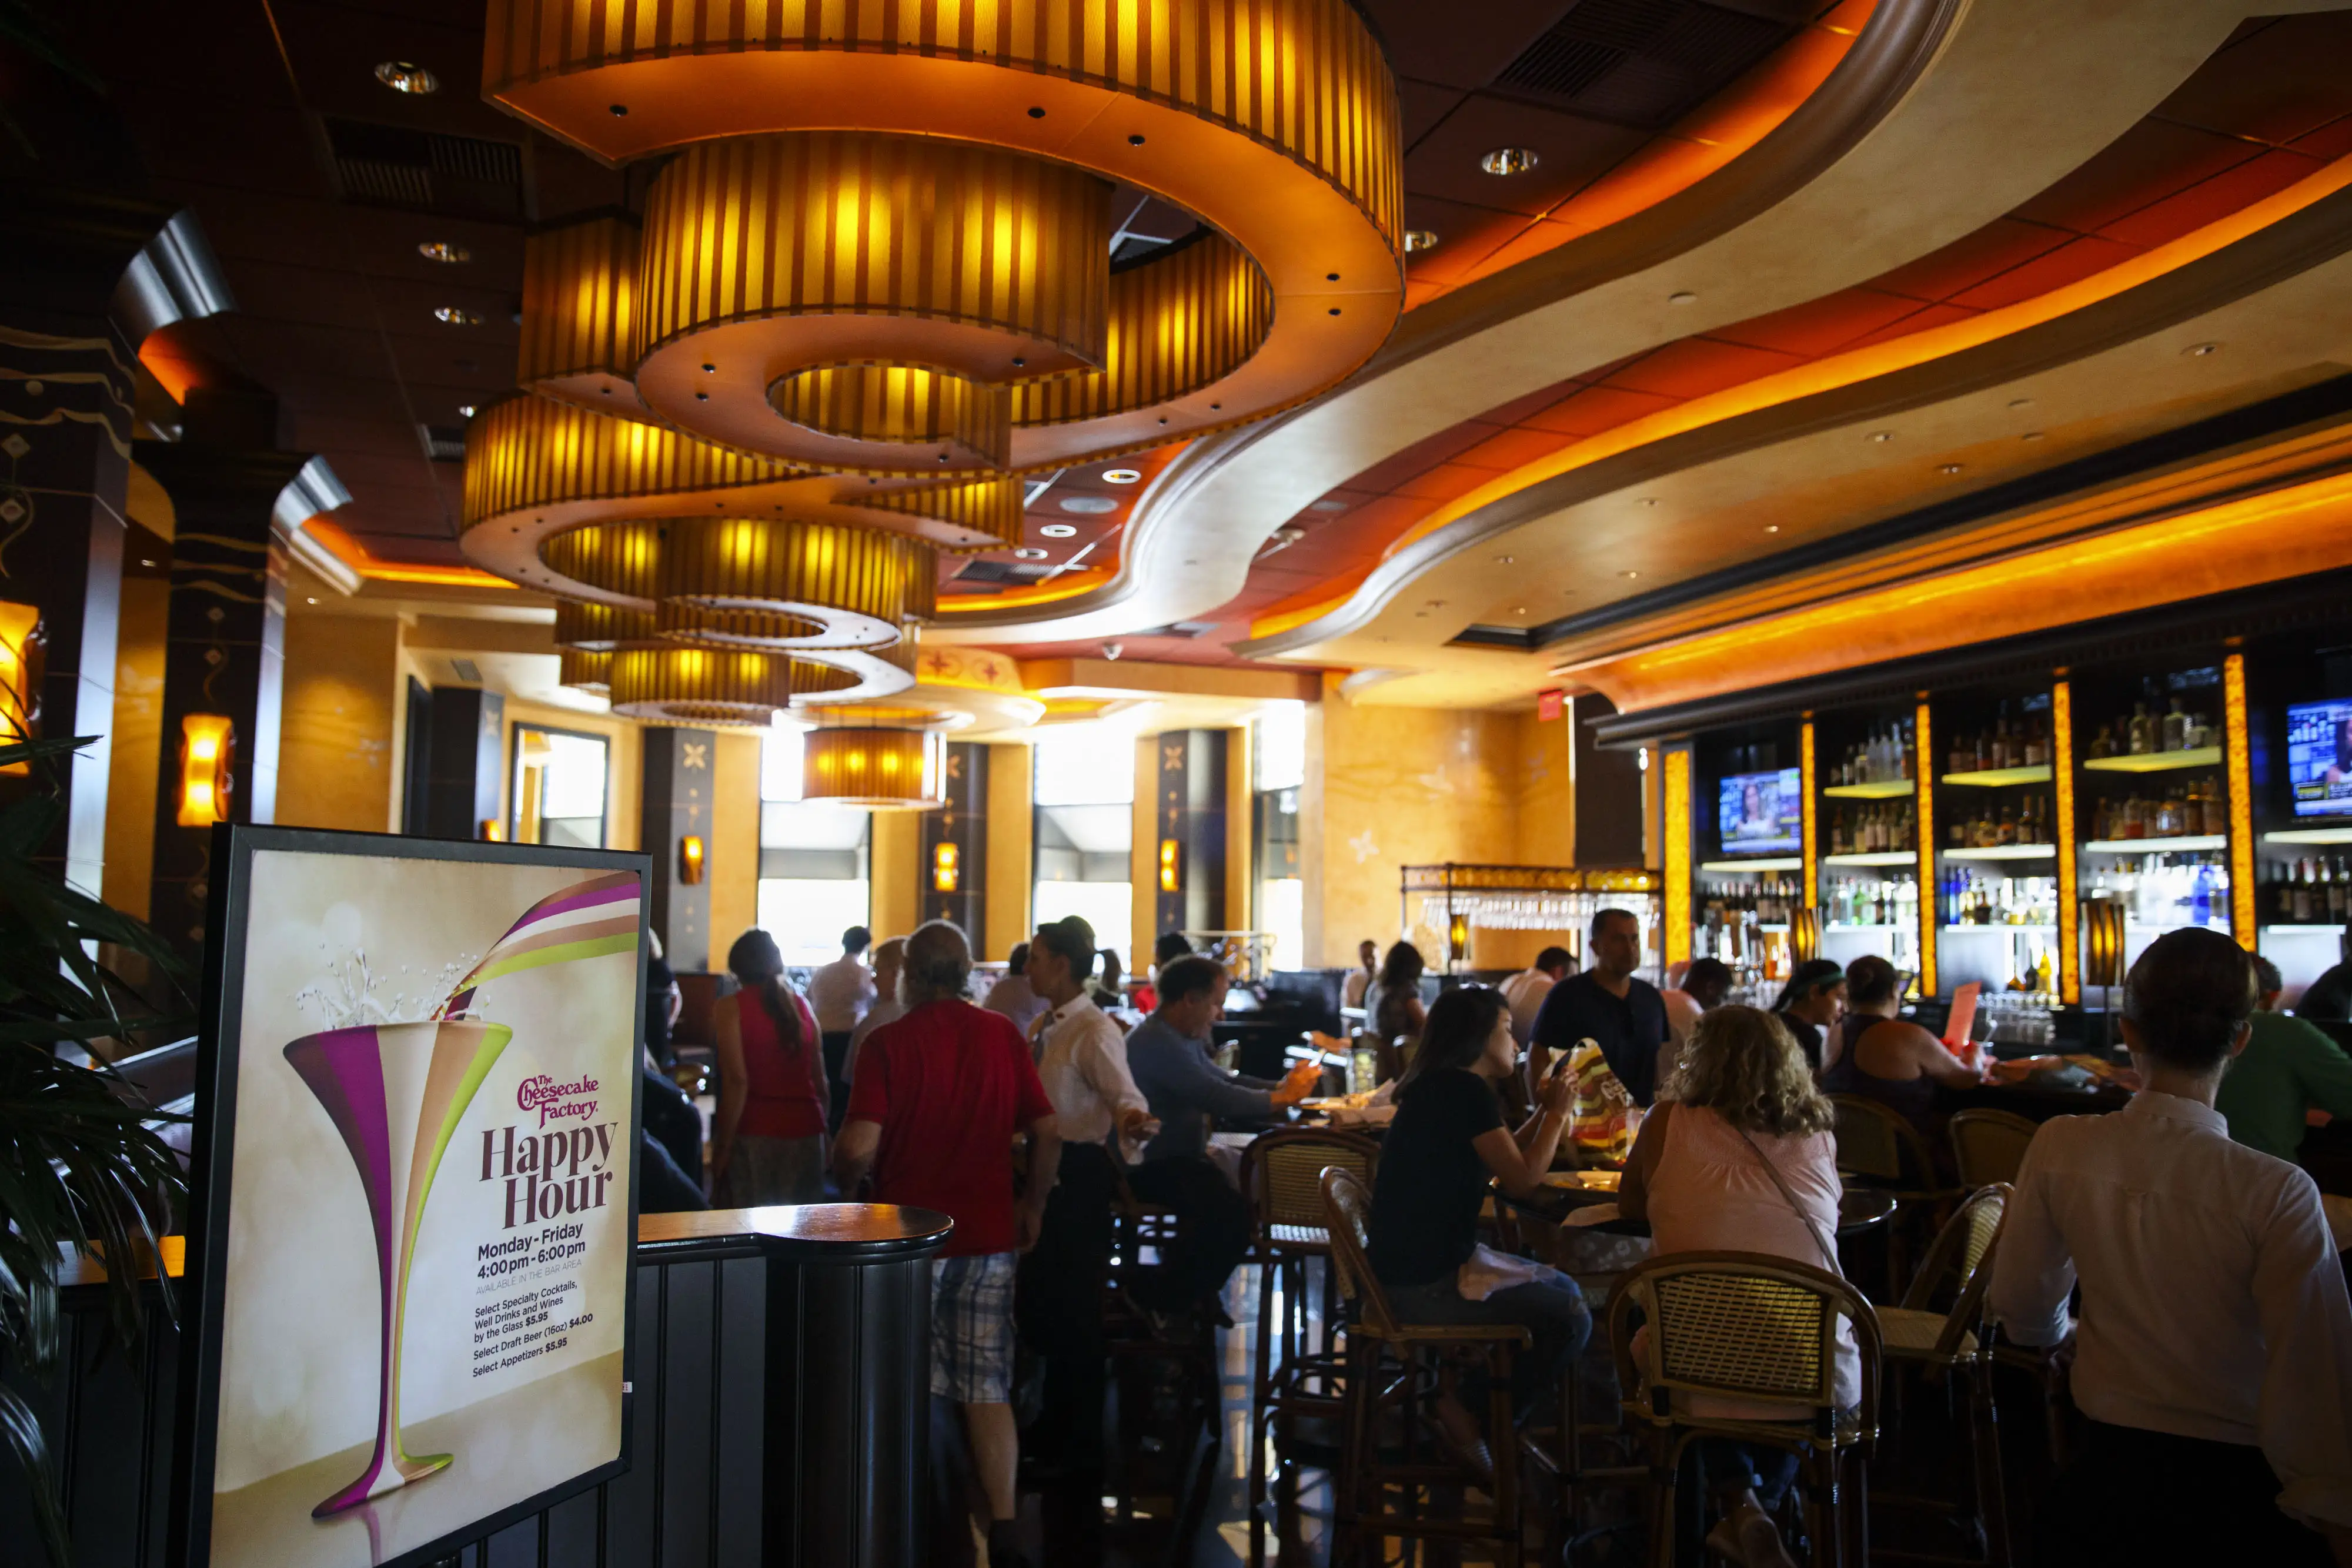 Inside A Cheesecake Factory Inc. Restaurant Ahead Of Earnings Figures